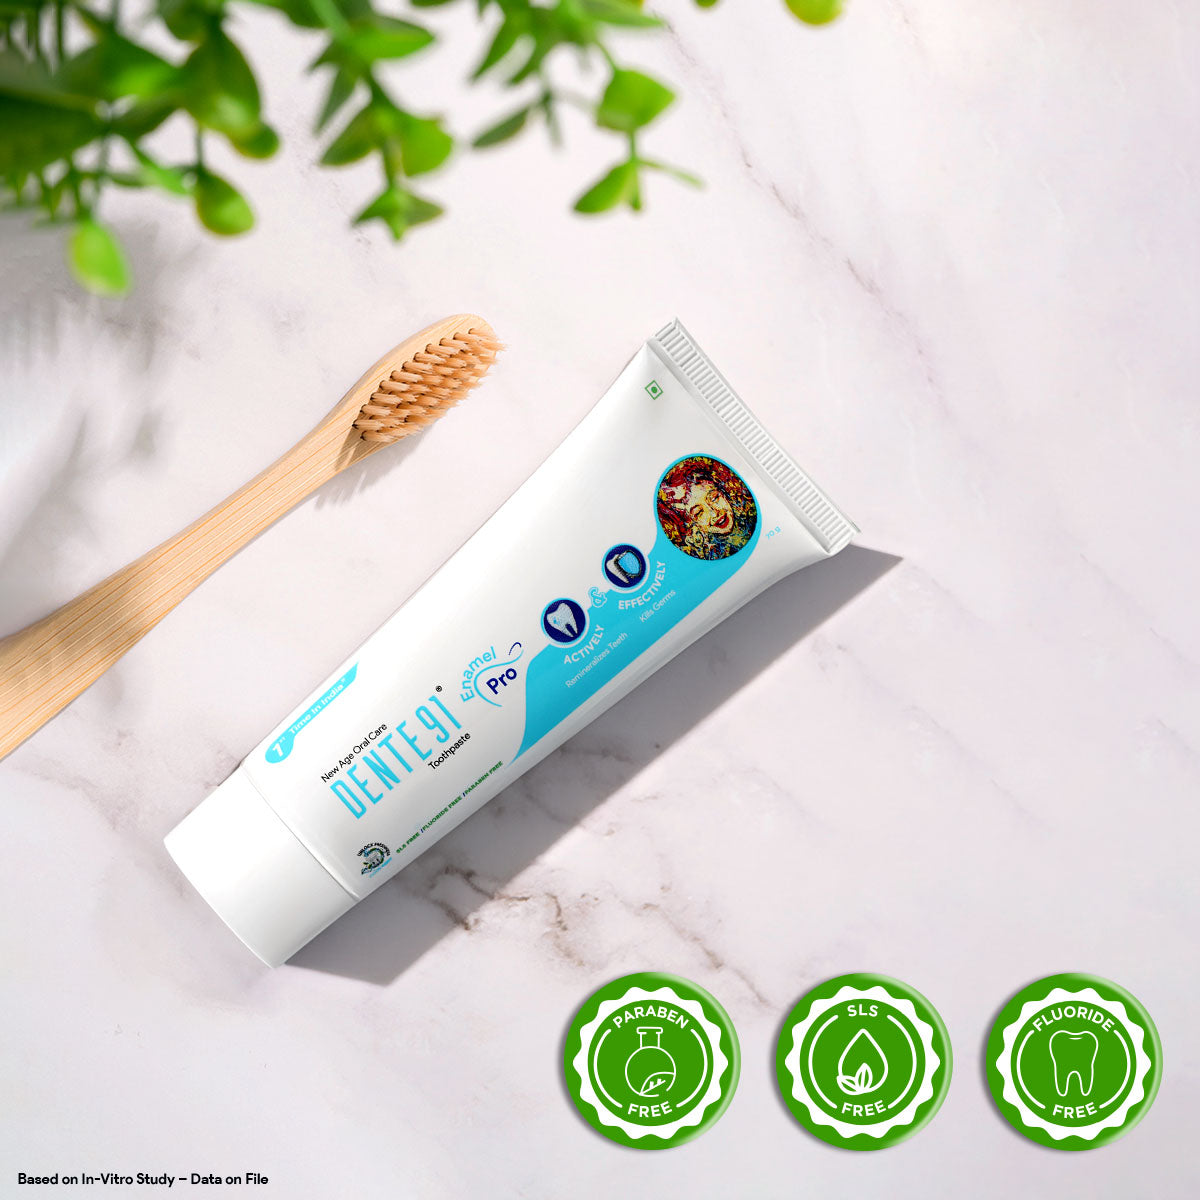 Dente91 Cool Mint Toothpaste, Strengthens Enamel, Repairs Cavities, Remineralizes Teeth , Sensitivity Relief, SLS Free, Fluoride Free, Paraben Free, Pack of 2, 140g